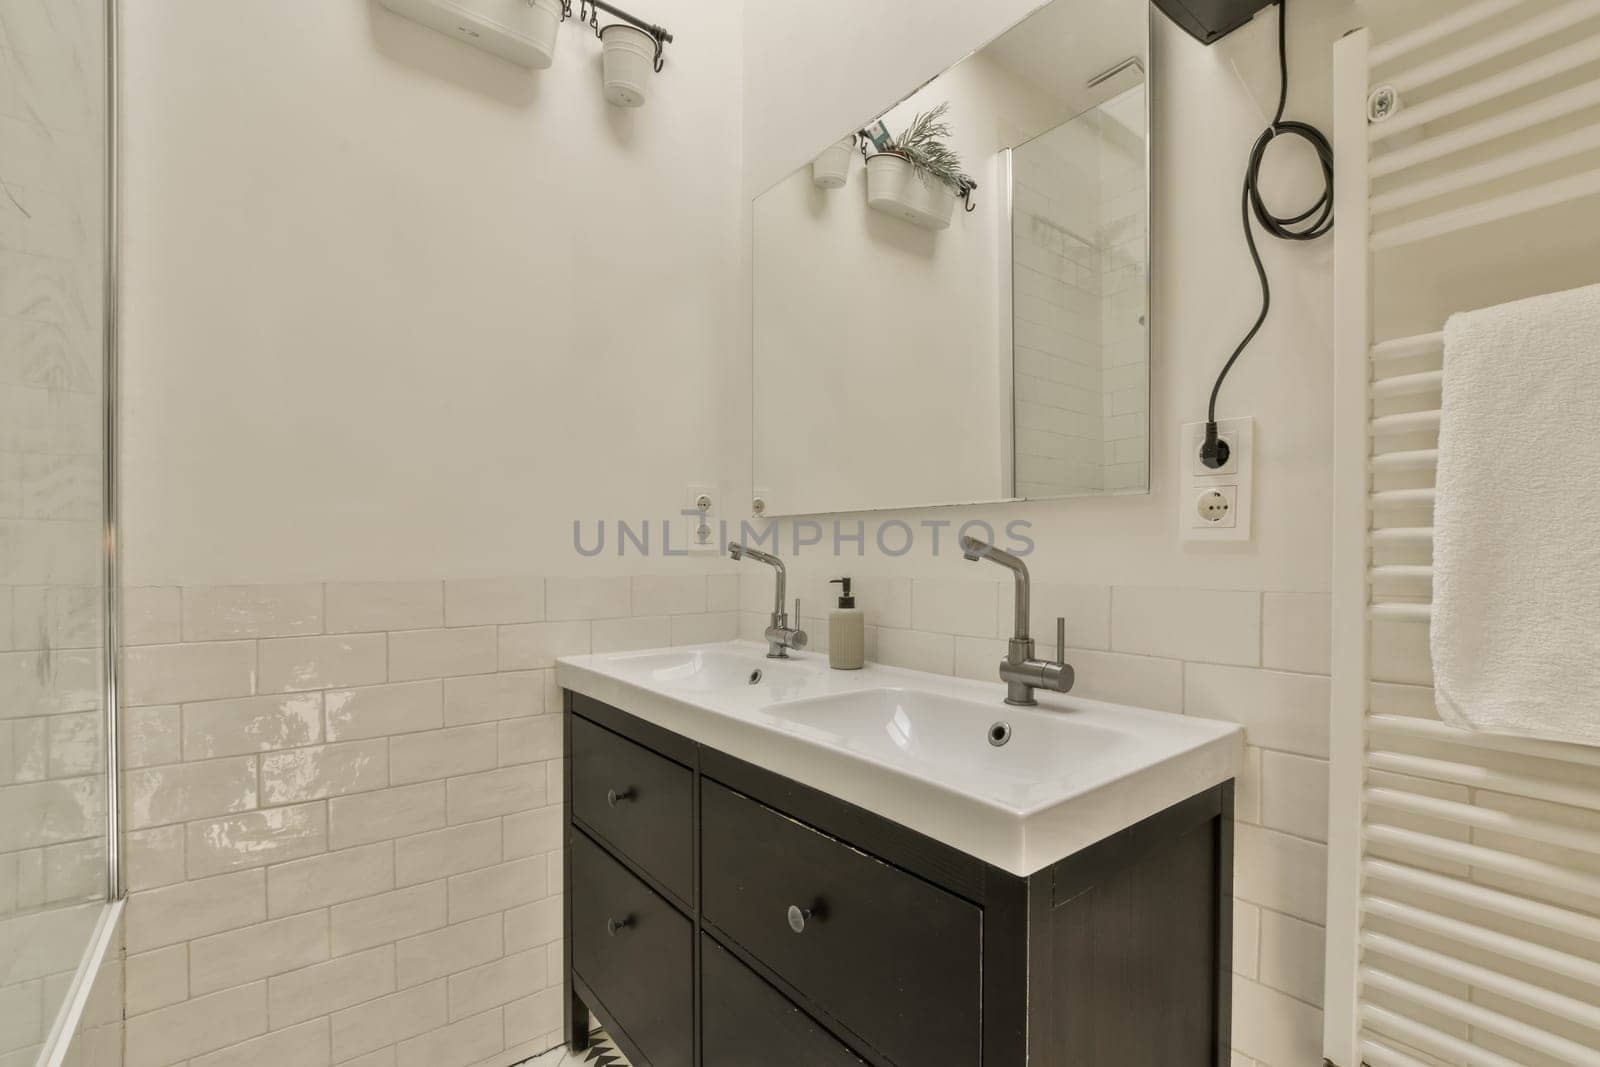 a bathroom with black cabinets and white tiles on the walls, along with a large mirror in the shower stall